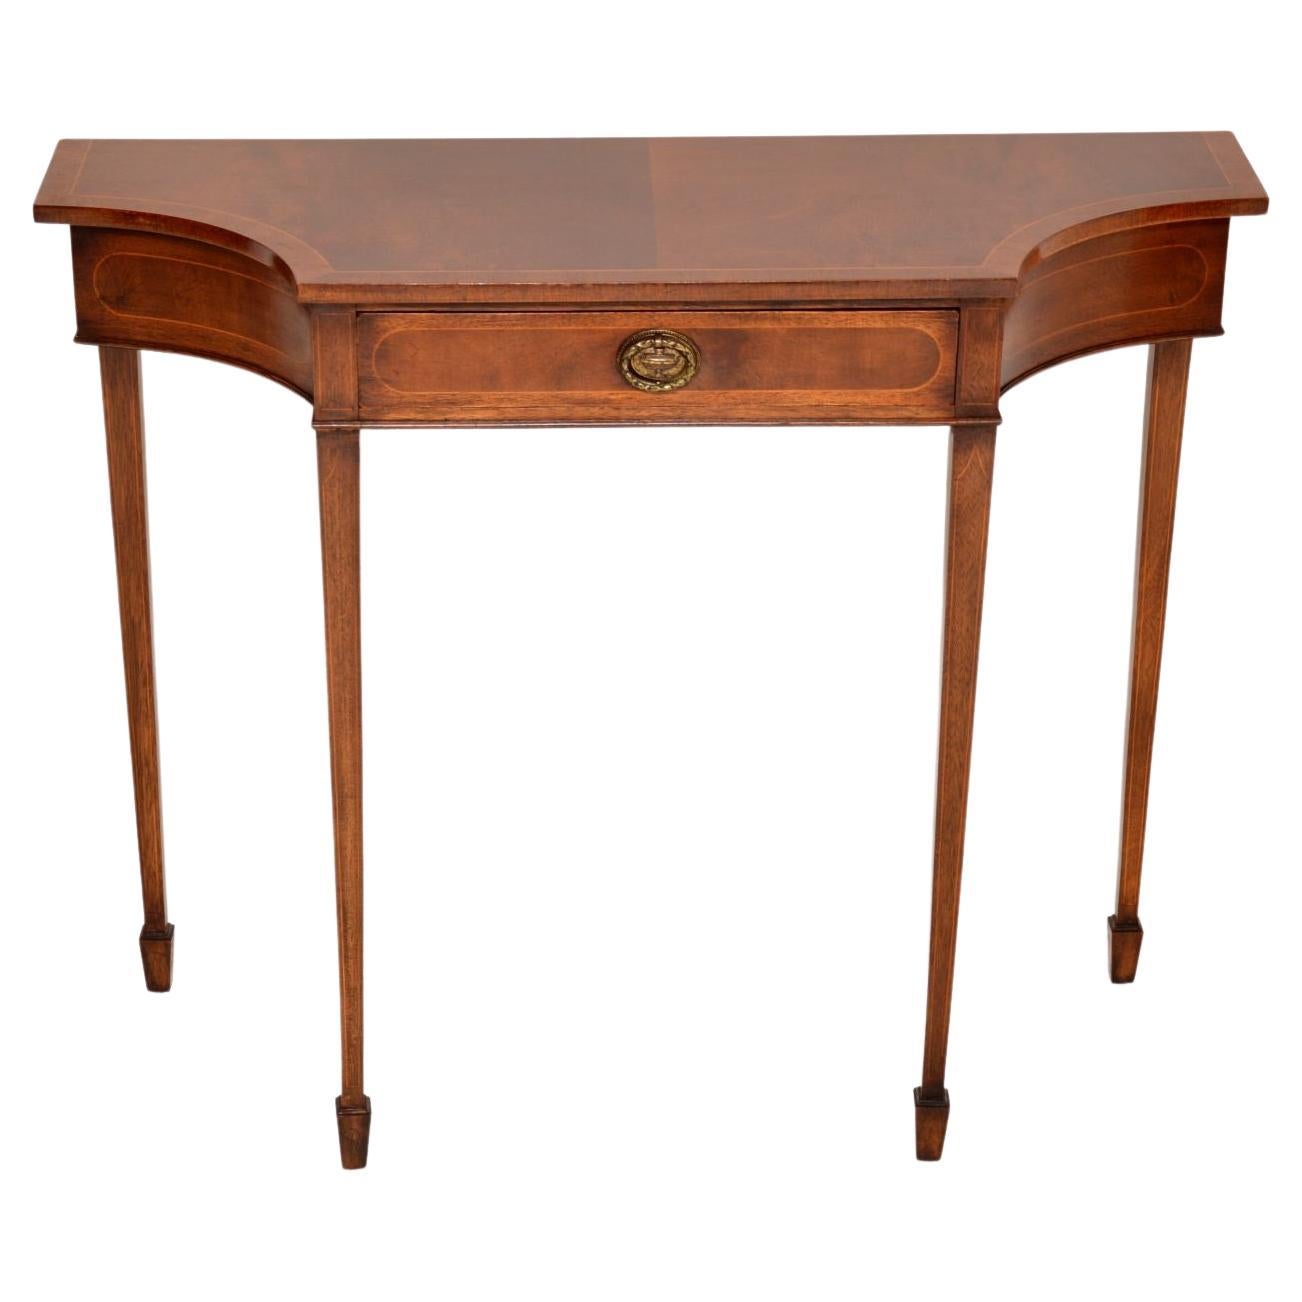 Antique Sheraton Style Console Table